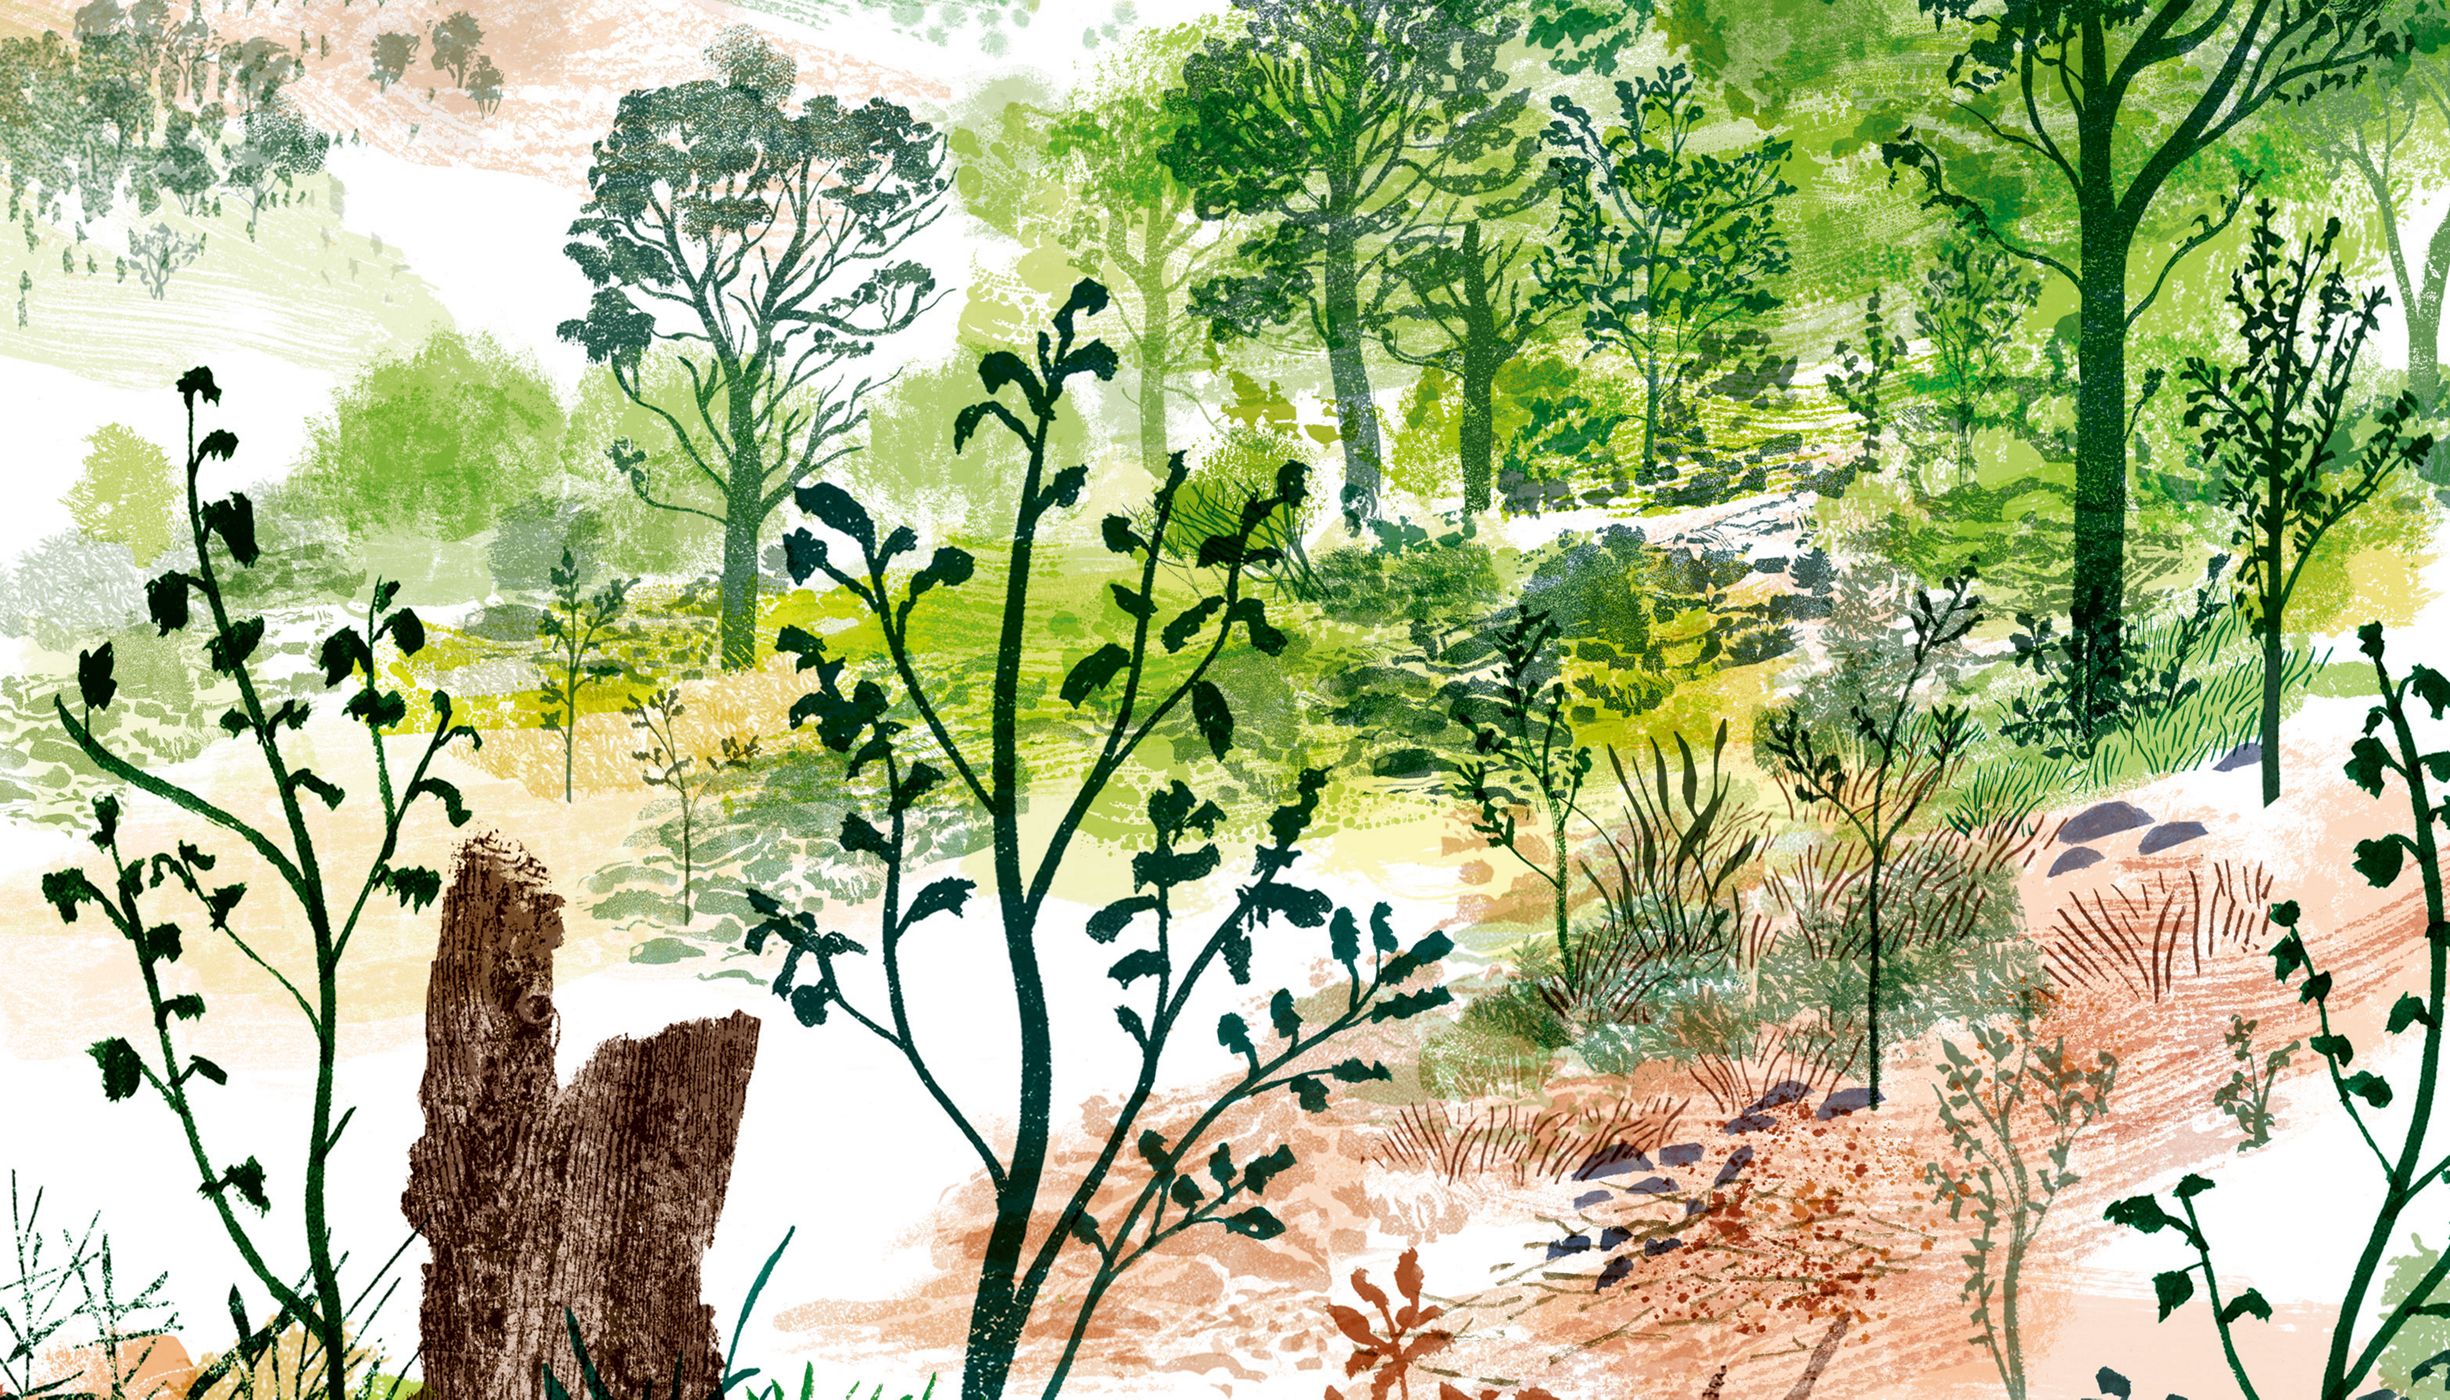 illustrated landscape, shrubs in foreground, forests in background